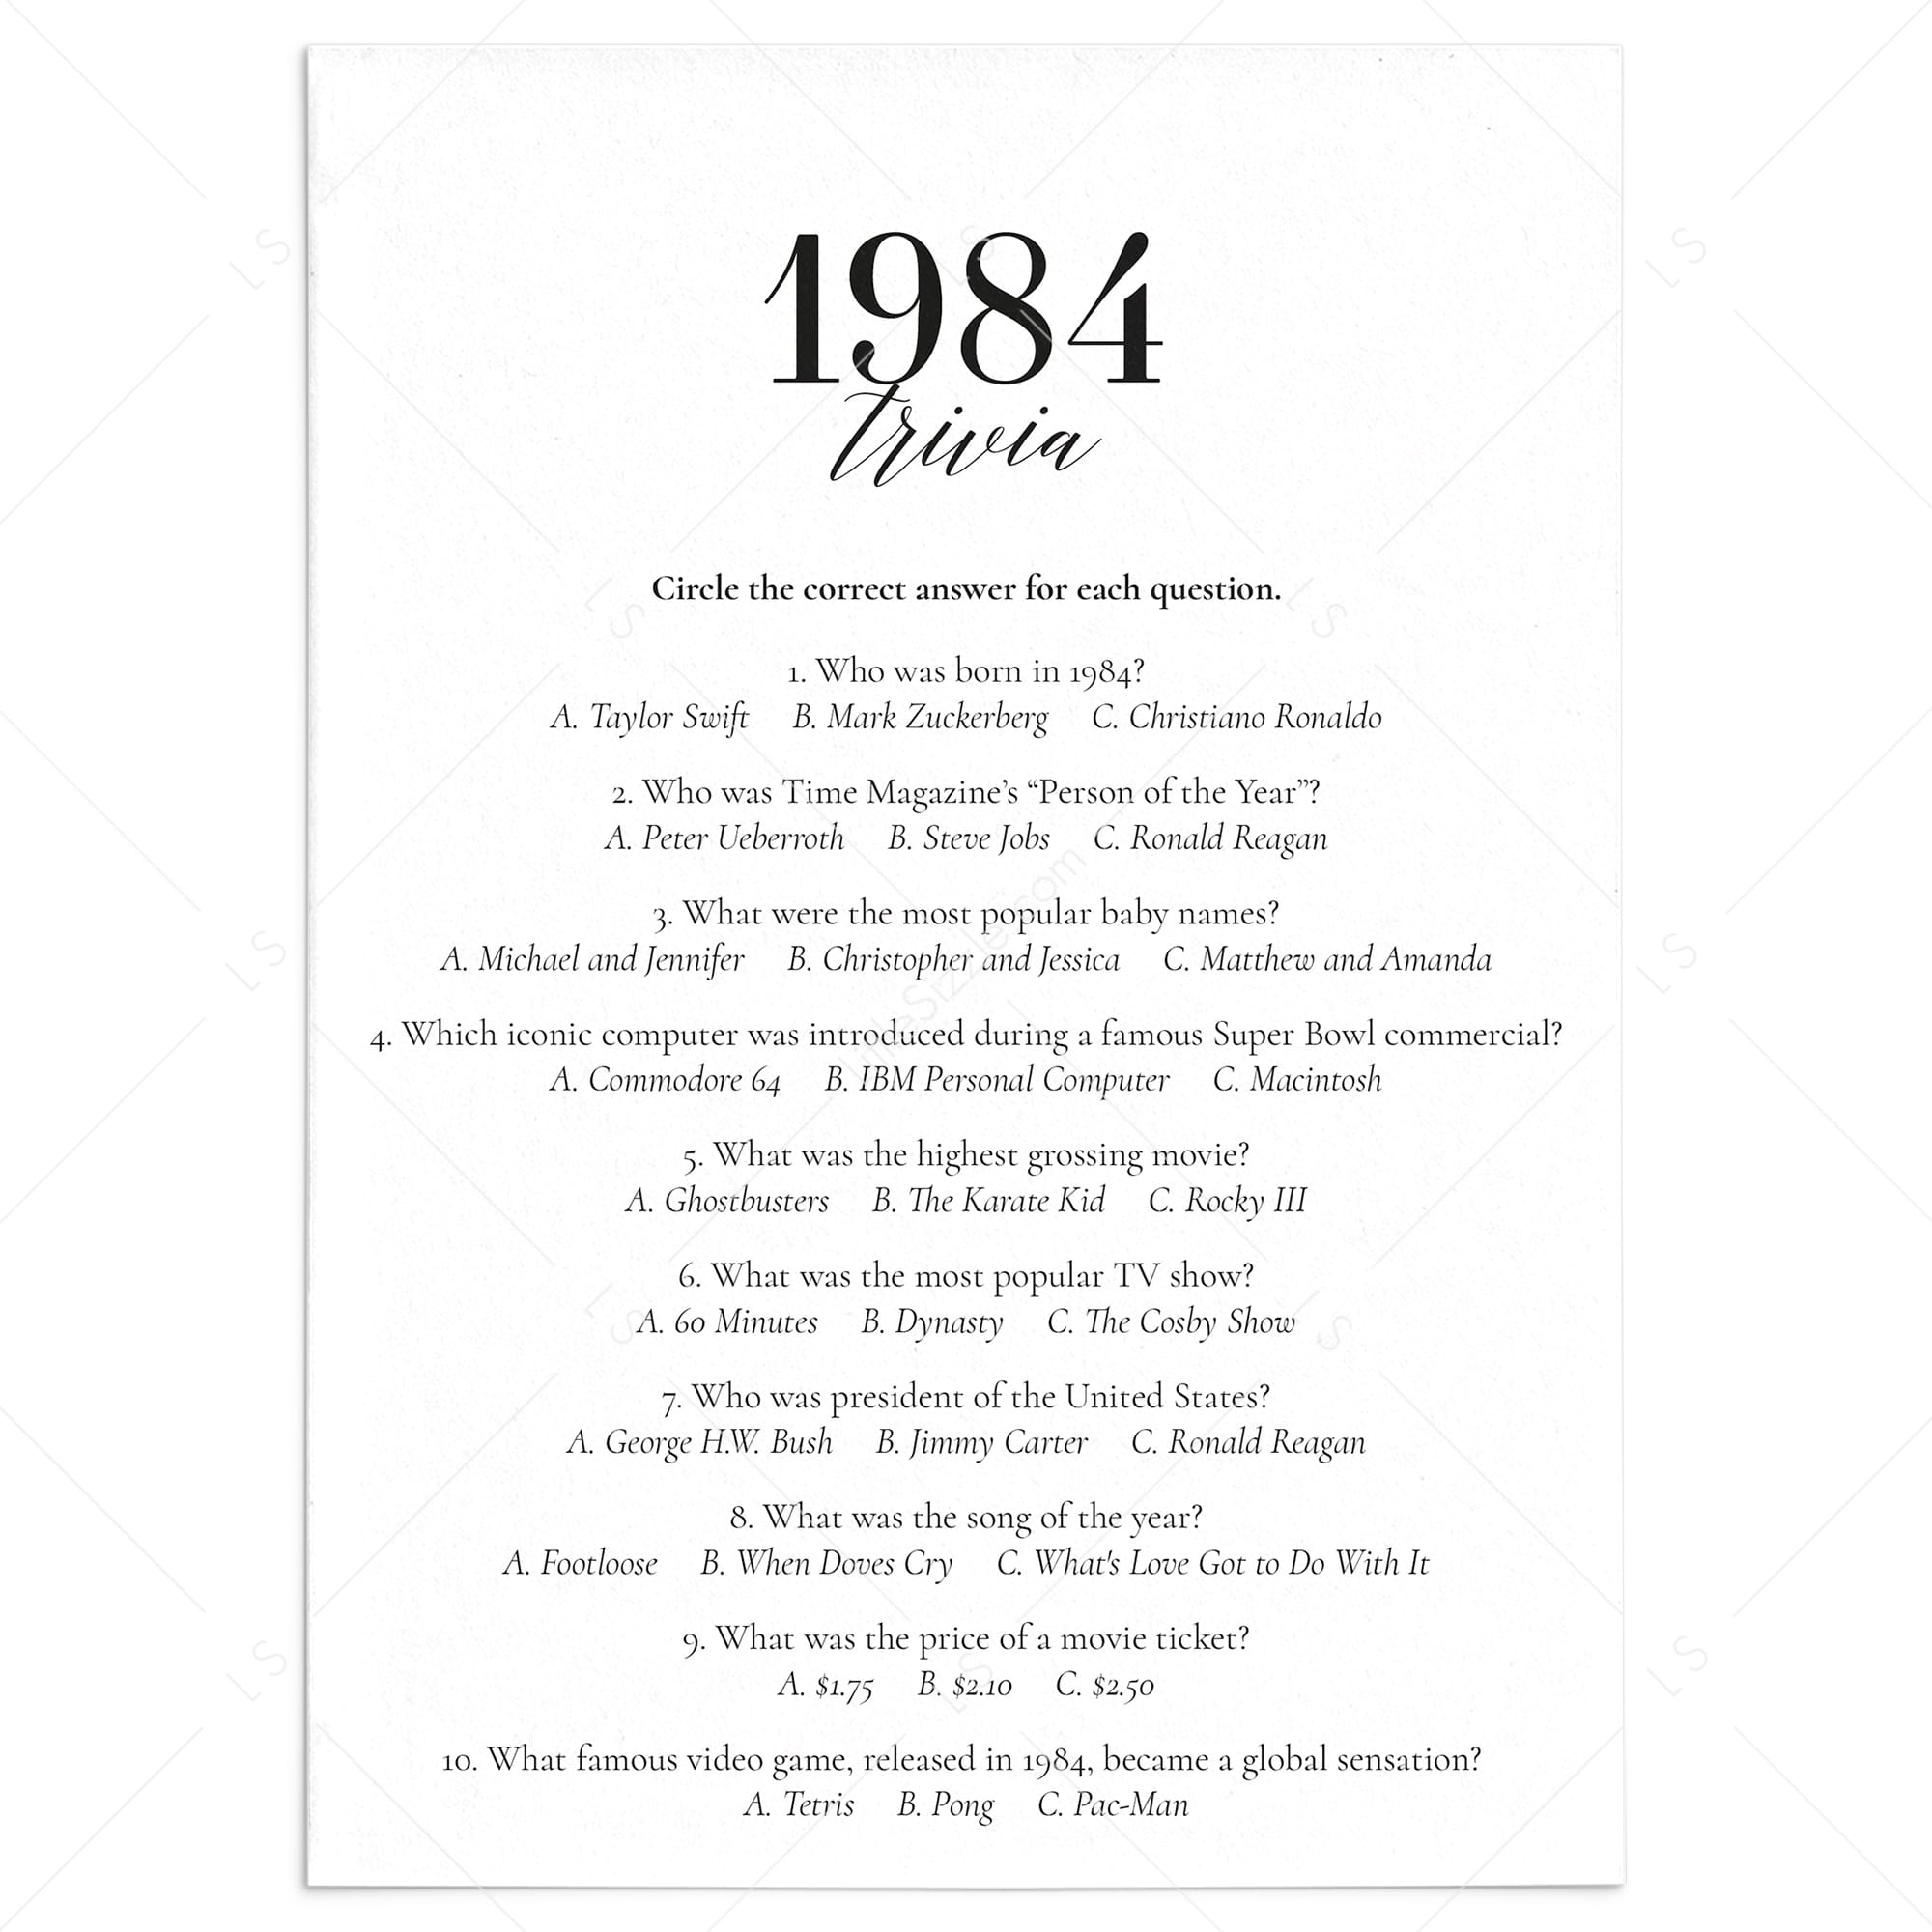 1984 Fun Facts Quiz with Answers Printable by LittleSizzle